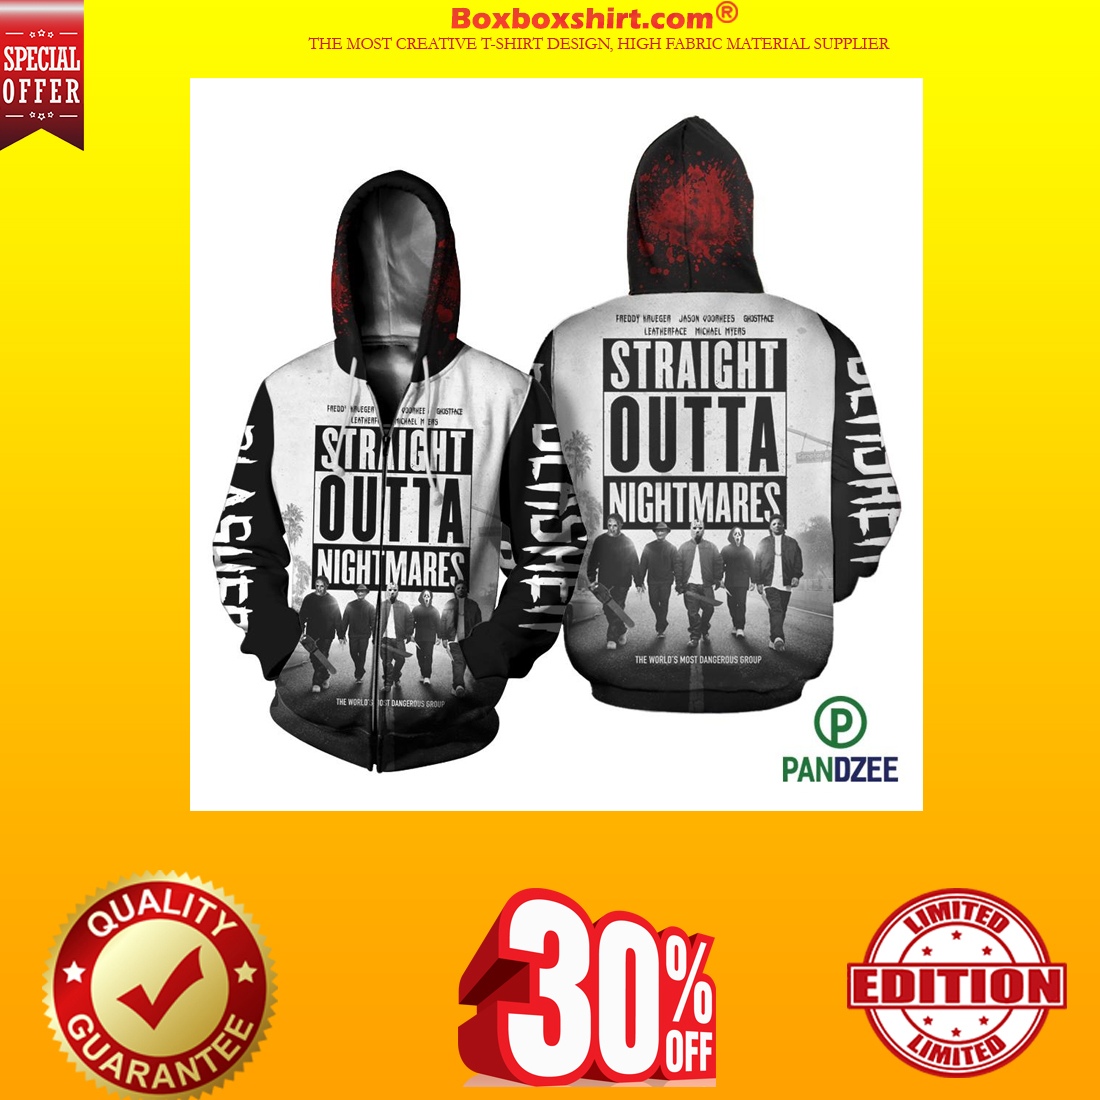 Straight outta nightmares 3d shirt and zipped hoodie